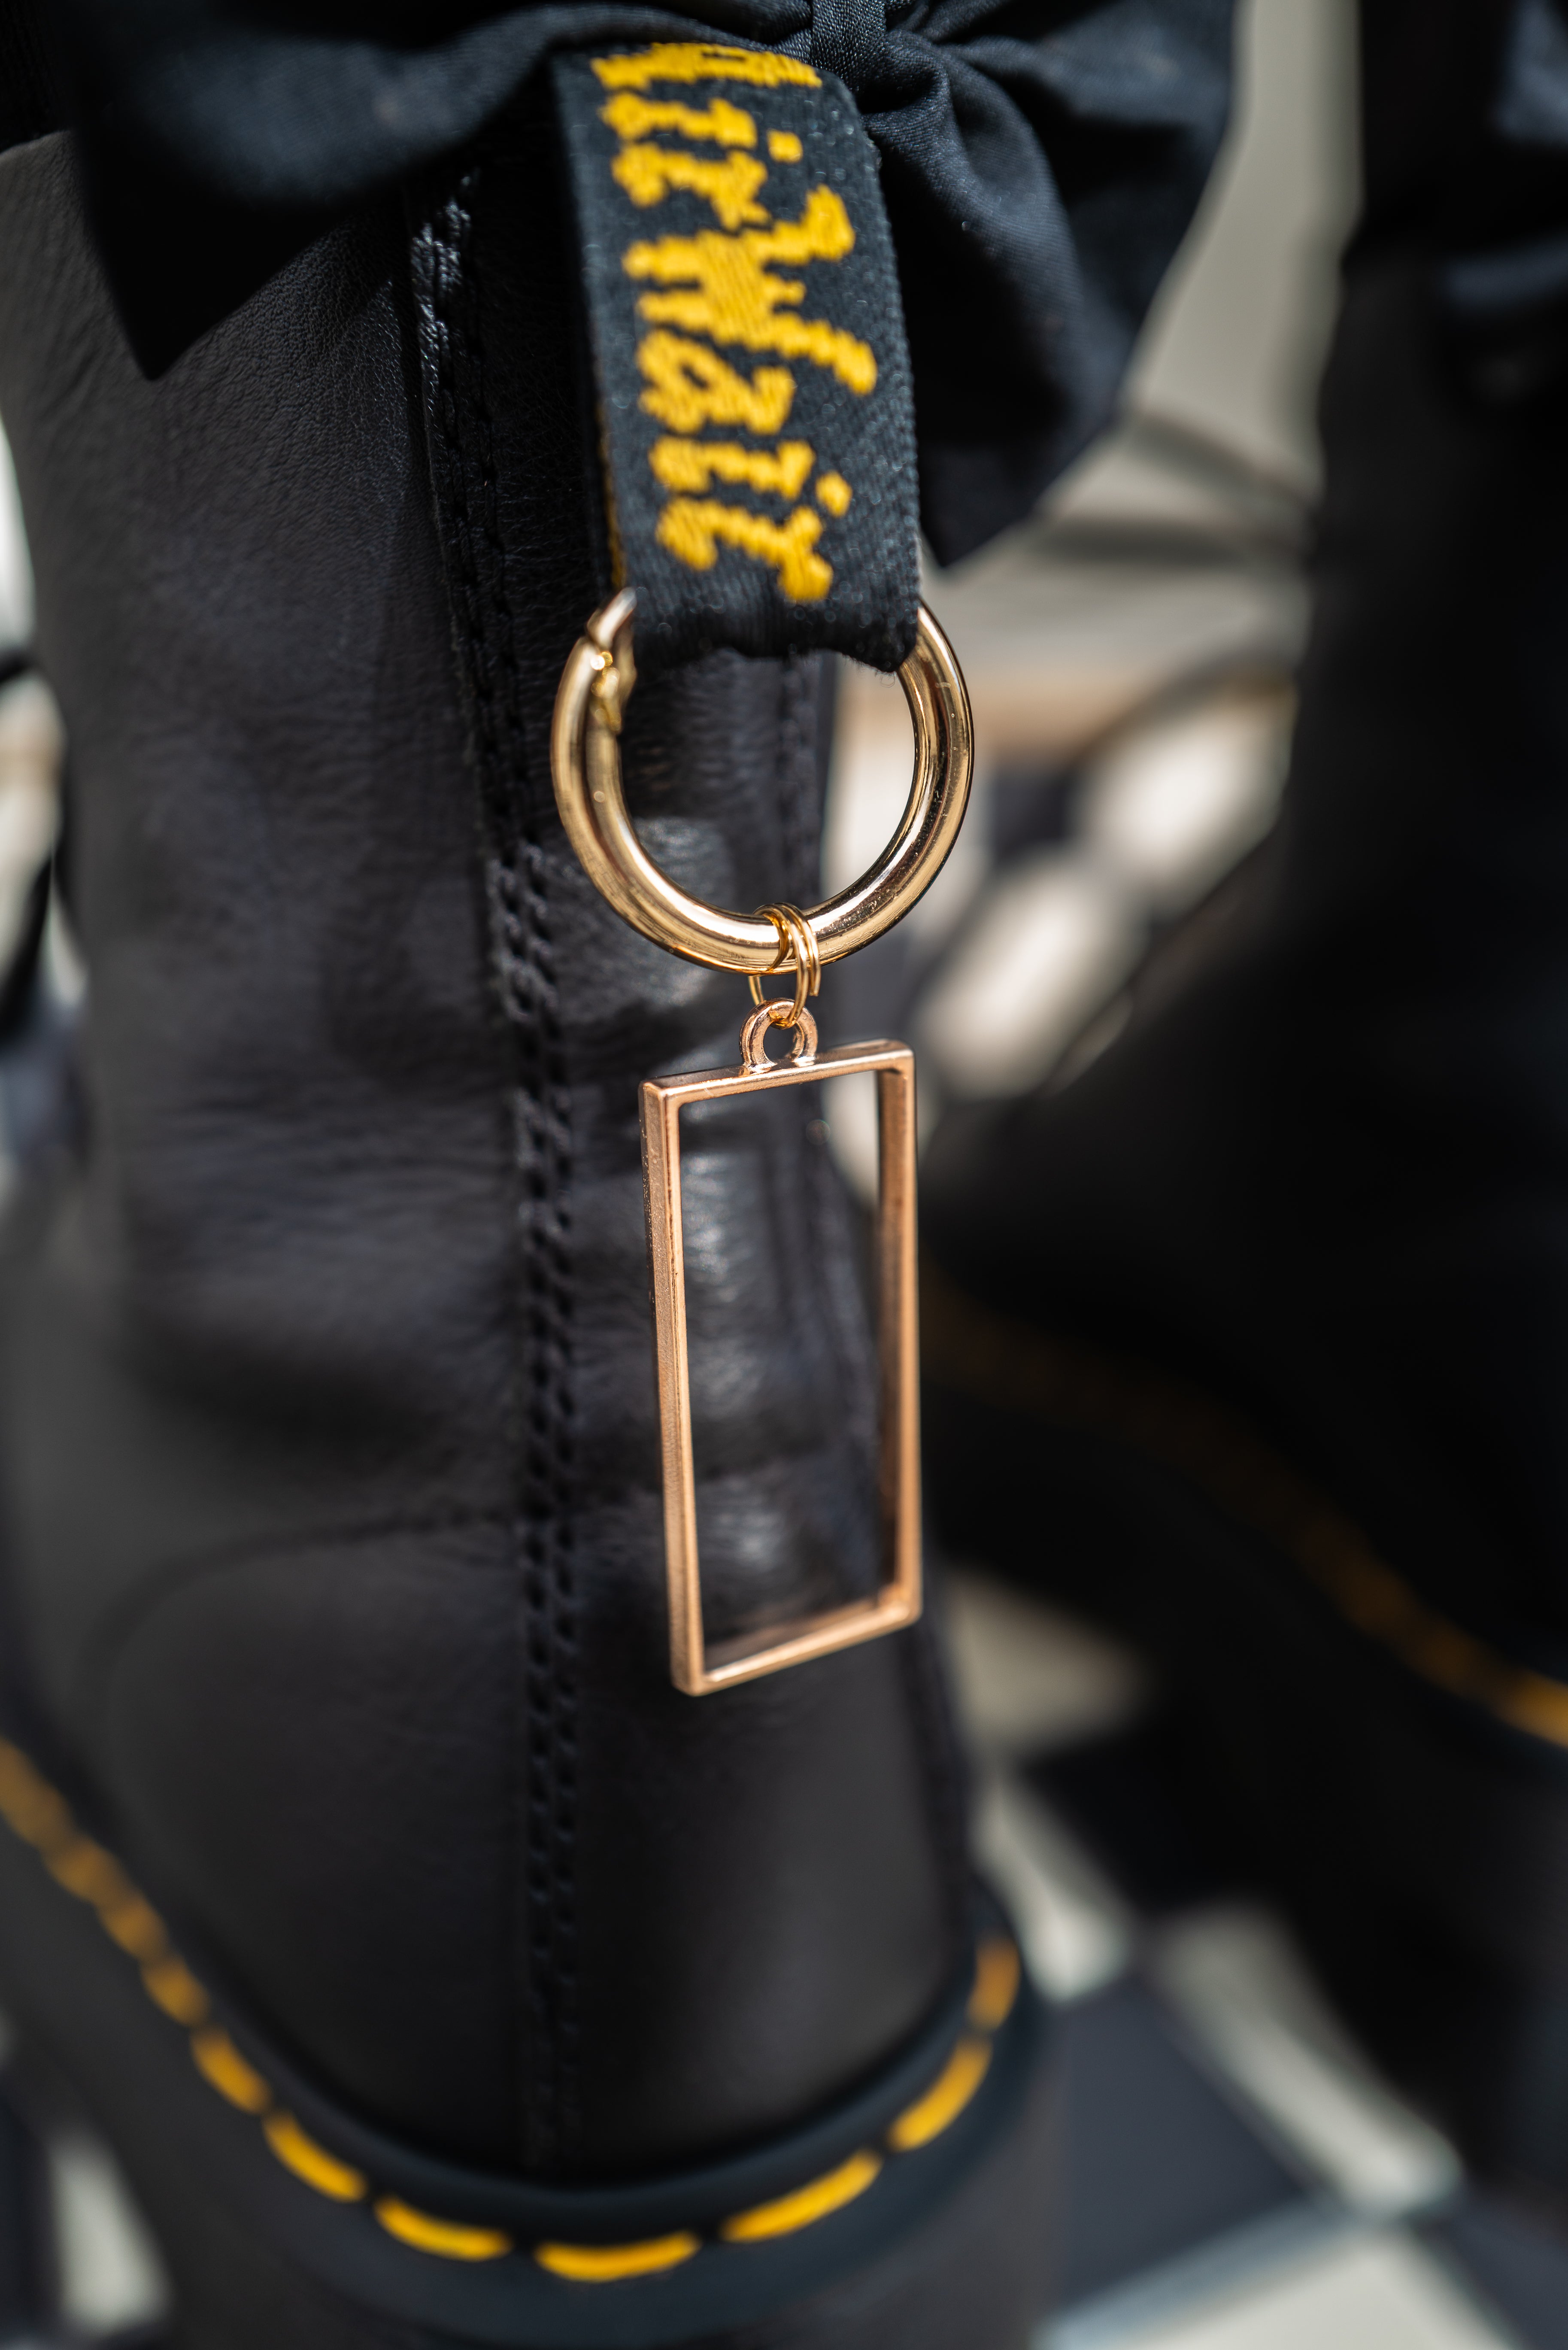 The 1975 Box Boot Charms - Gold